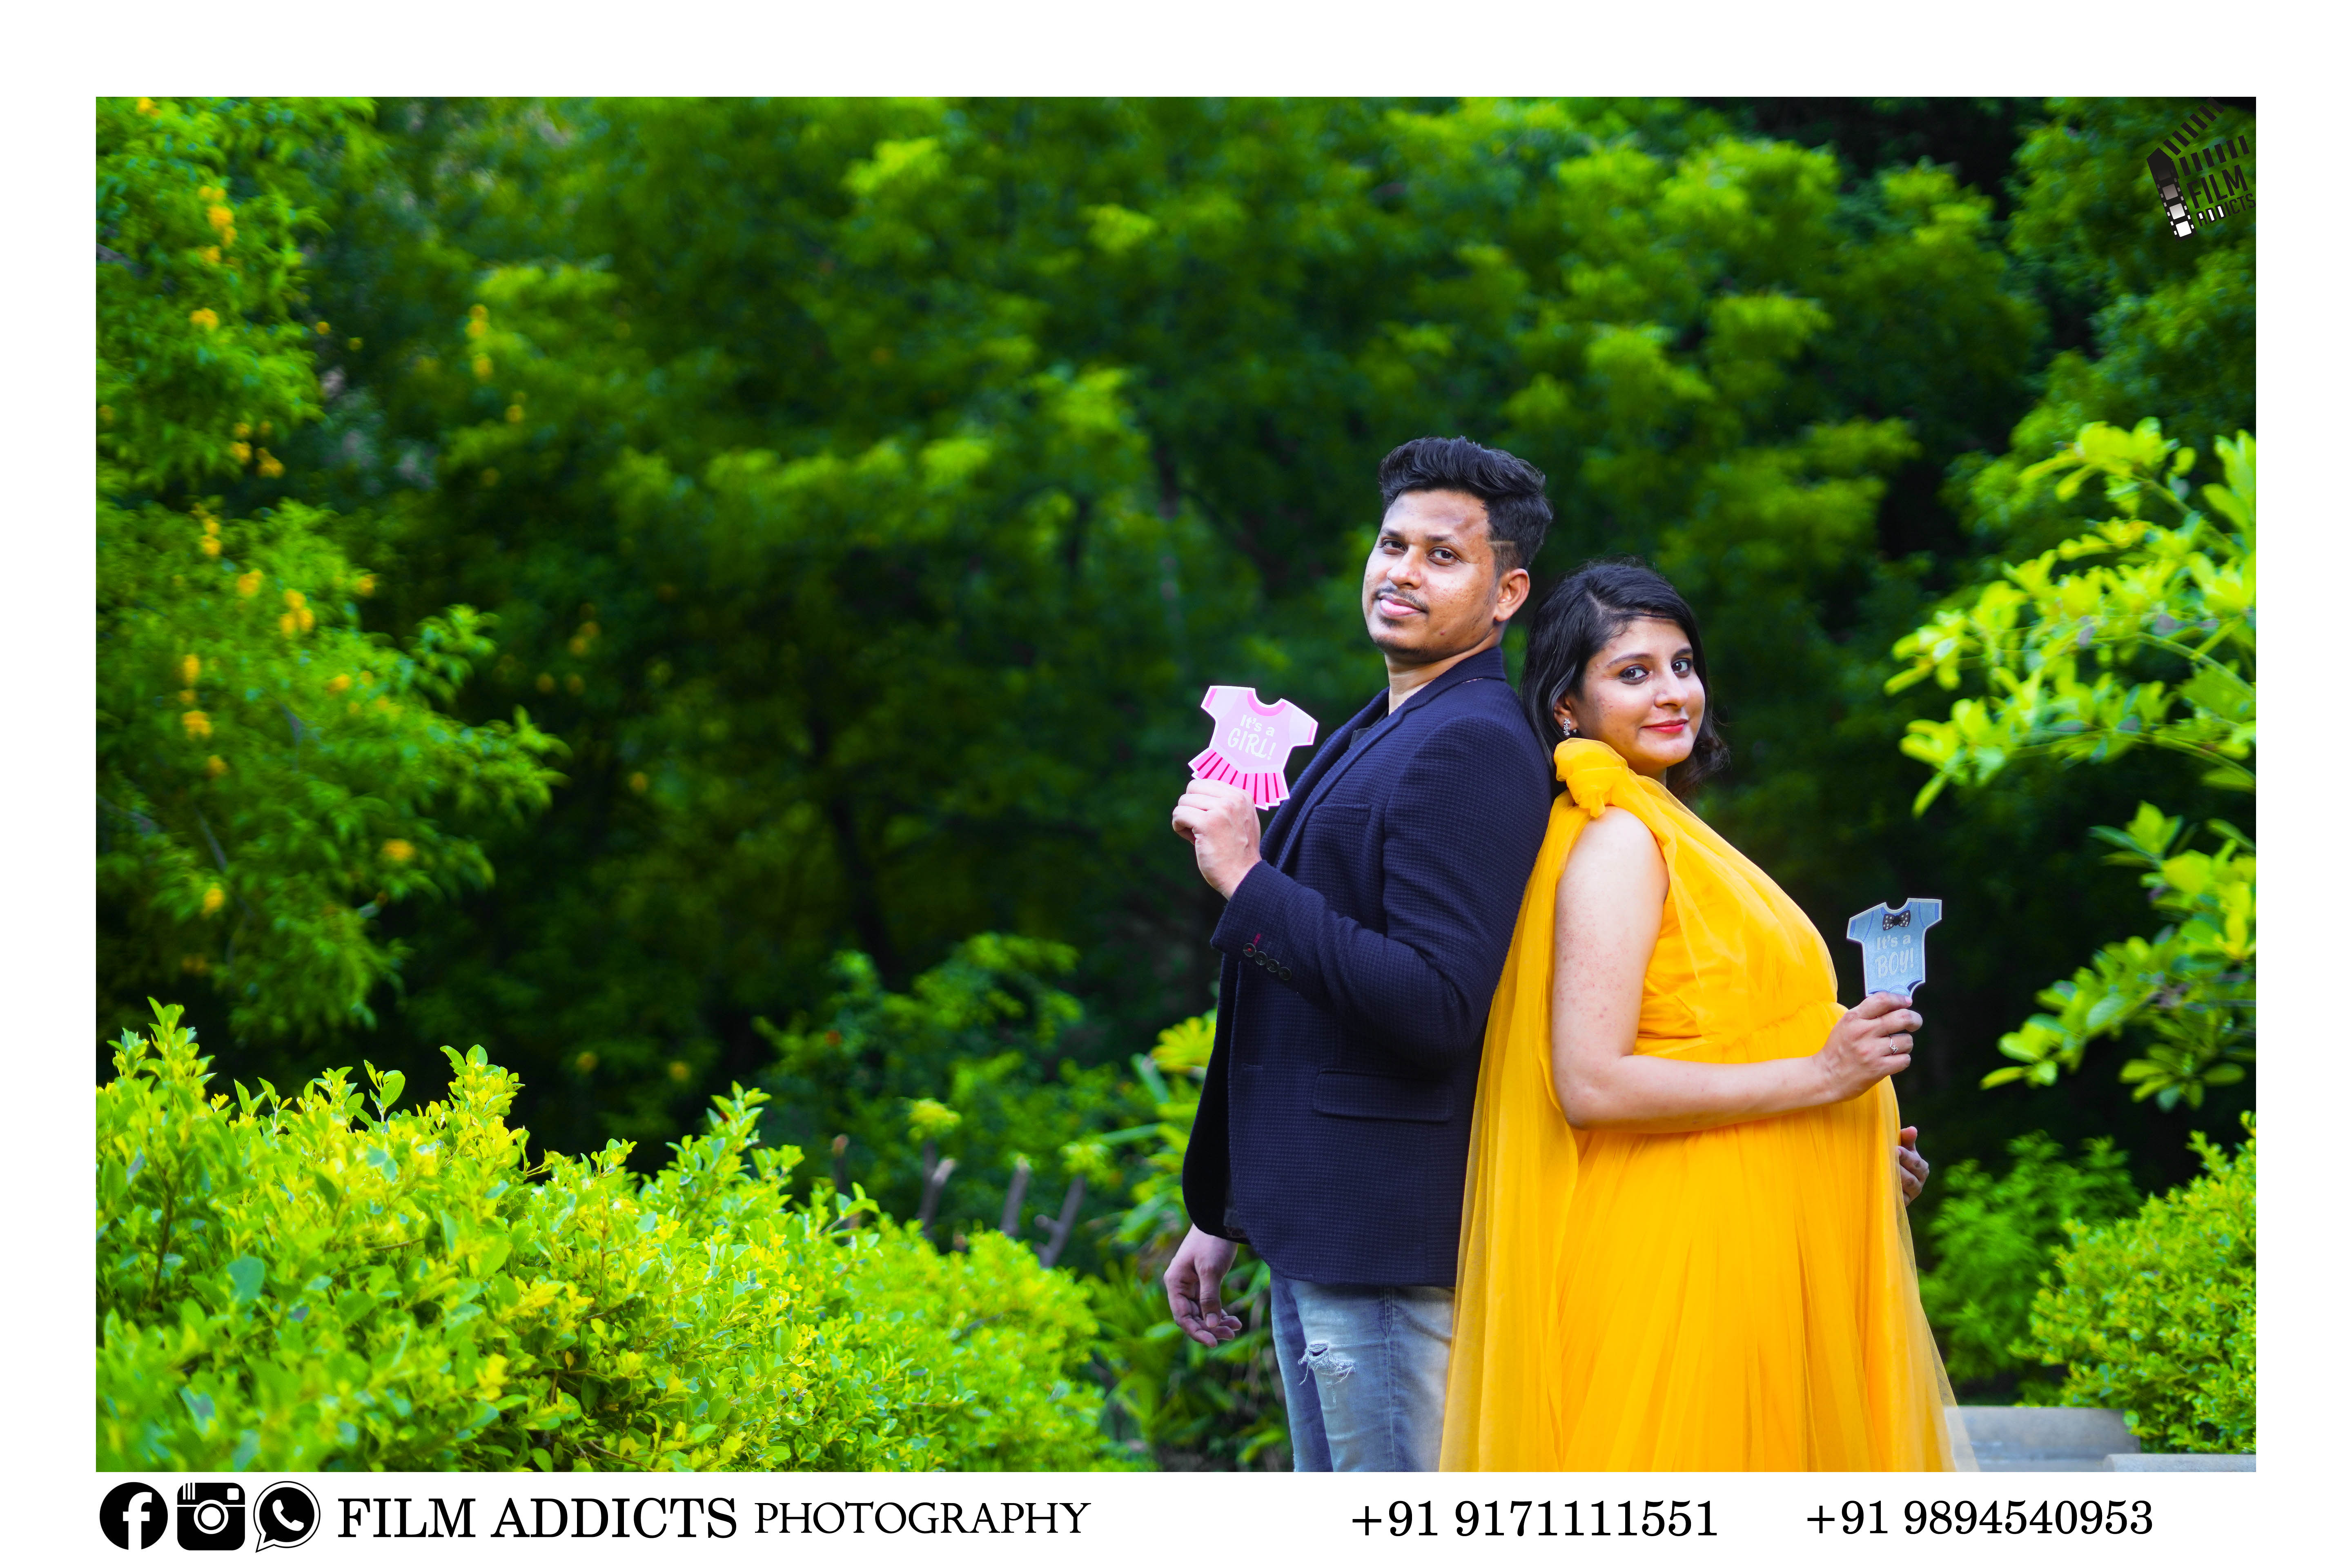 Best Baby Shower Photographers in Dindigul-FilmAddicts Photography,best wedding photography in Dindigul,best candid photographers in Dindigul,best candid photography in Dindigul,best marriage photographers in Dindigul,best marriage photography in Dindigul,best photographers in Dindigul,best photography in Dindigul,best wedding candid photography in Dindigul,best wedding candid photographers in Dindigul,best wedding video in Dindigul,best wedding videographers in Dindigul,best wedding videography in Dindigul,best candid videographers in Dindigul,best candid videography in Dindigul,best marriage videographers in Dindigul,best marriage videography in Dindigul,best videographers in Dindigul,best videography in Dindigul,best wedding candid videography in Dindigul,best wedding candid videographers in Dindigul,best helicam operators in Dindigul,best drone operators in Dindigul,best wedding studio in Dindigul,best professional photographers in Dindigul,best professional photography in Dindigul,No.1 wedding photographers in Dindigul,No.1 wedding photography in Dindigul,Dindigul wedding photographers,Dindigul wedding photography,Dindigul wedding videos,best candid videos in Dindigul,best candid photos in Dindigul,best helicam operators photography in Dindigul,best helicam operator photographers in Dindigul,best outdoor videography in Dindigul,best professional wedding photography in Dindigul,best outdoor photography in Dindigul,best outdoor photographers in Dindigul,best drone operators photographers in Dindigul,best wedding candid videography in Dindigul,tamilnadu wedding photography, tamilnadu.